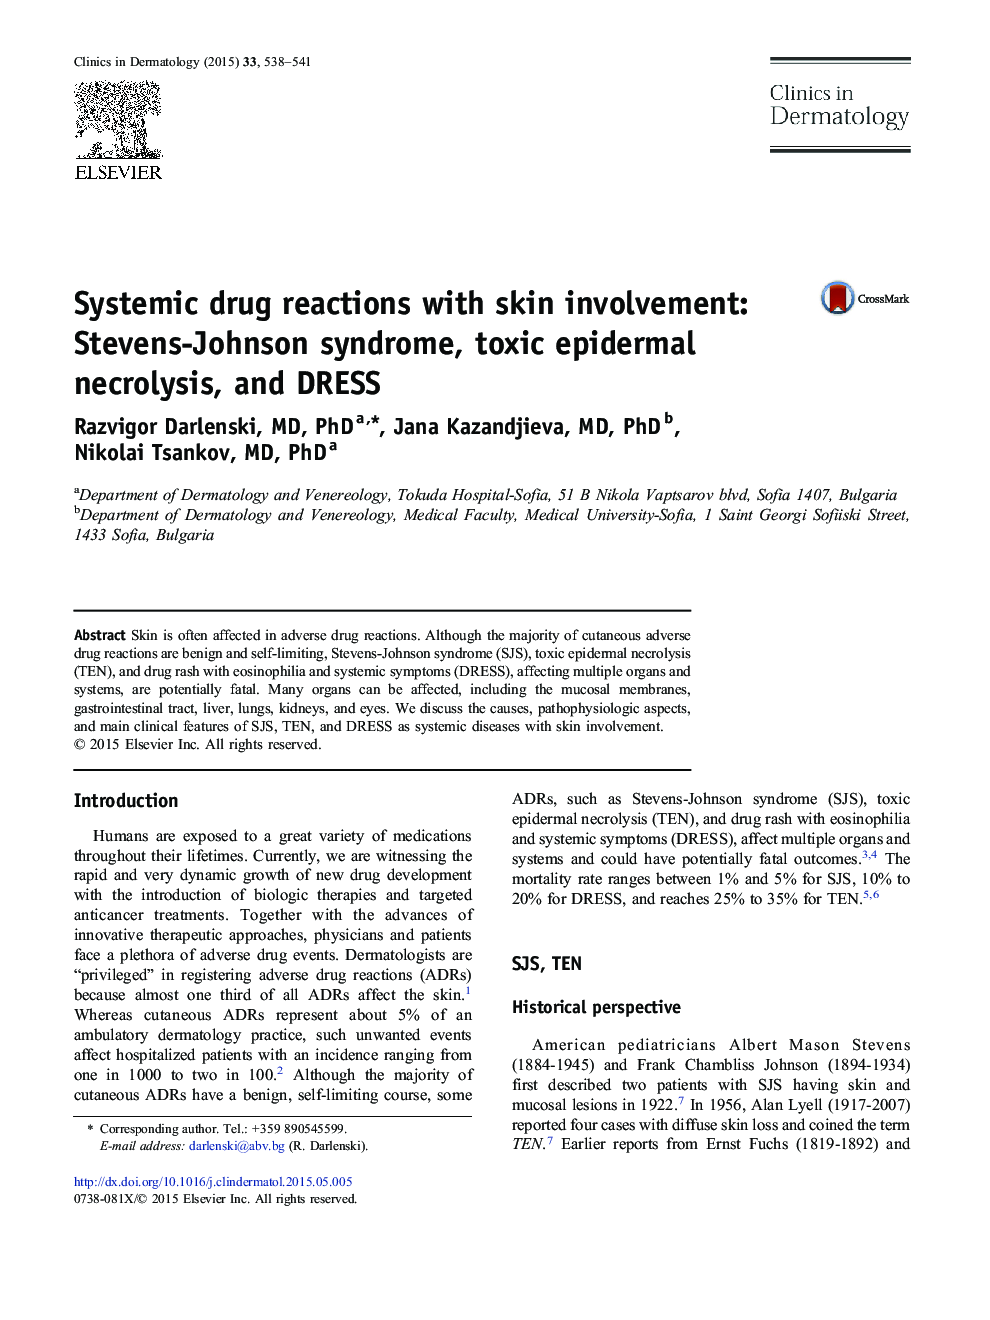 Systemic drug reactions with skin involvement: Stevens-Johnson syndrome, toxic epidermal necrolysis, and DRESS